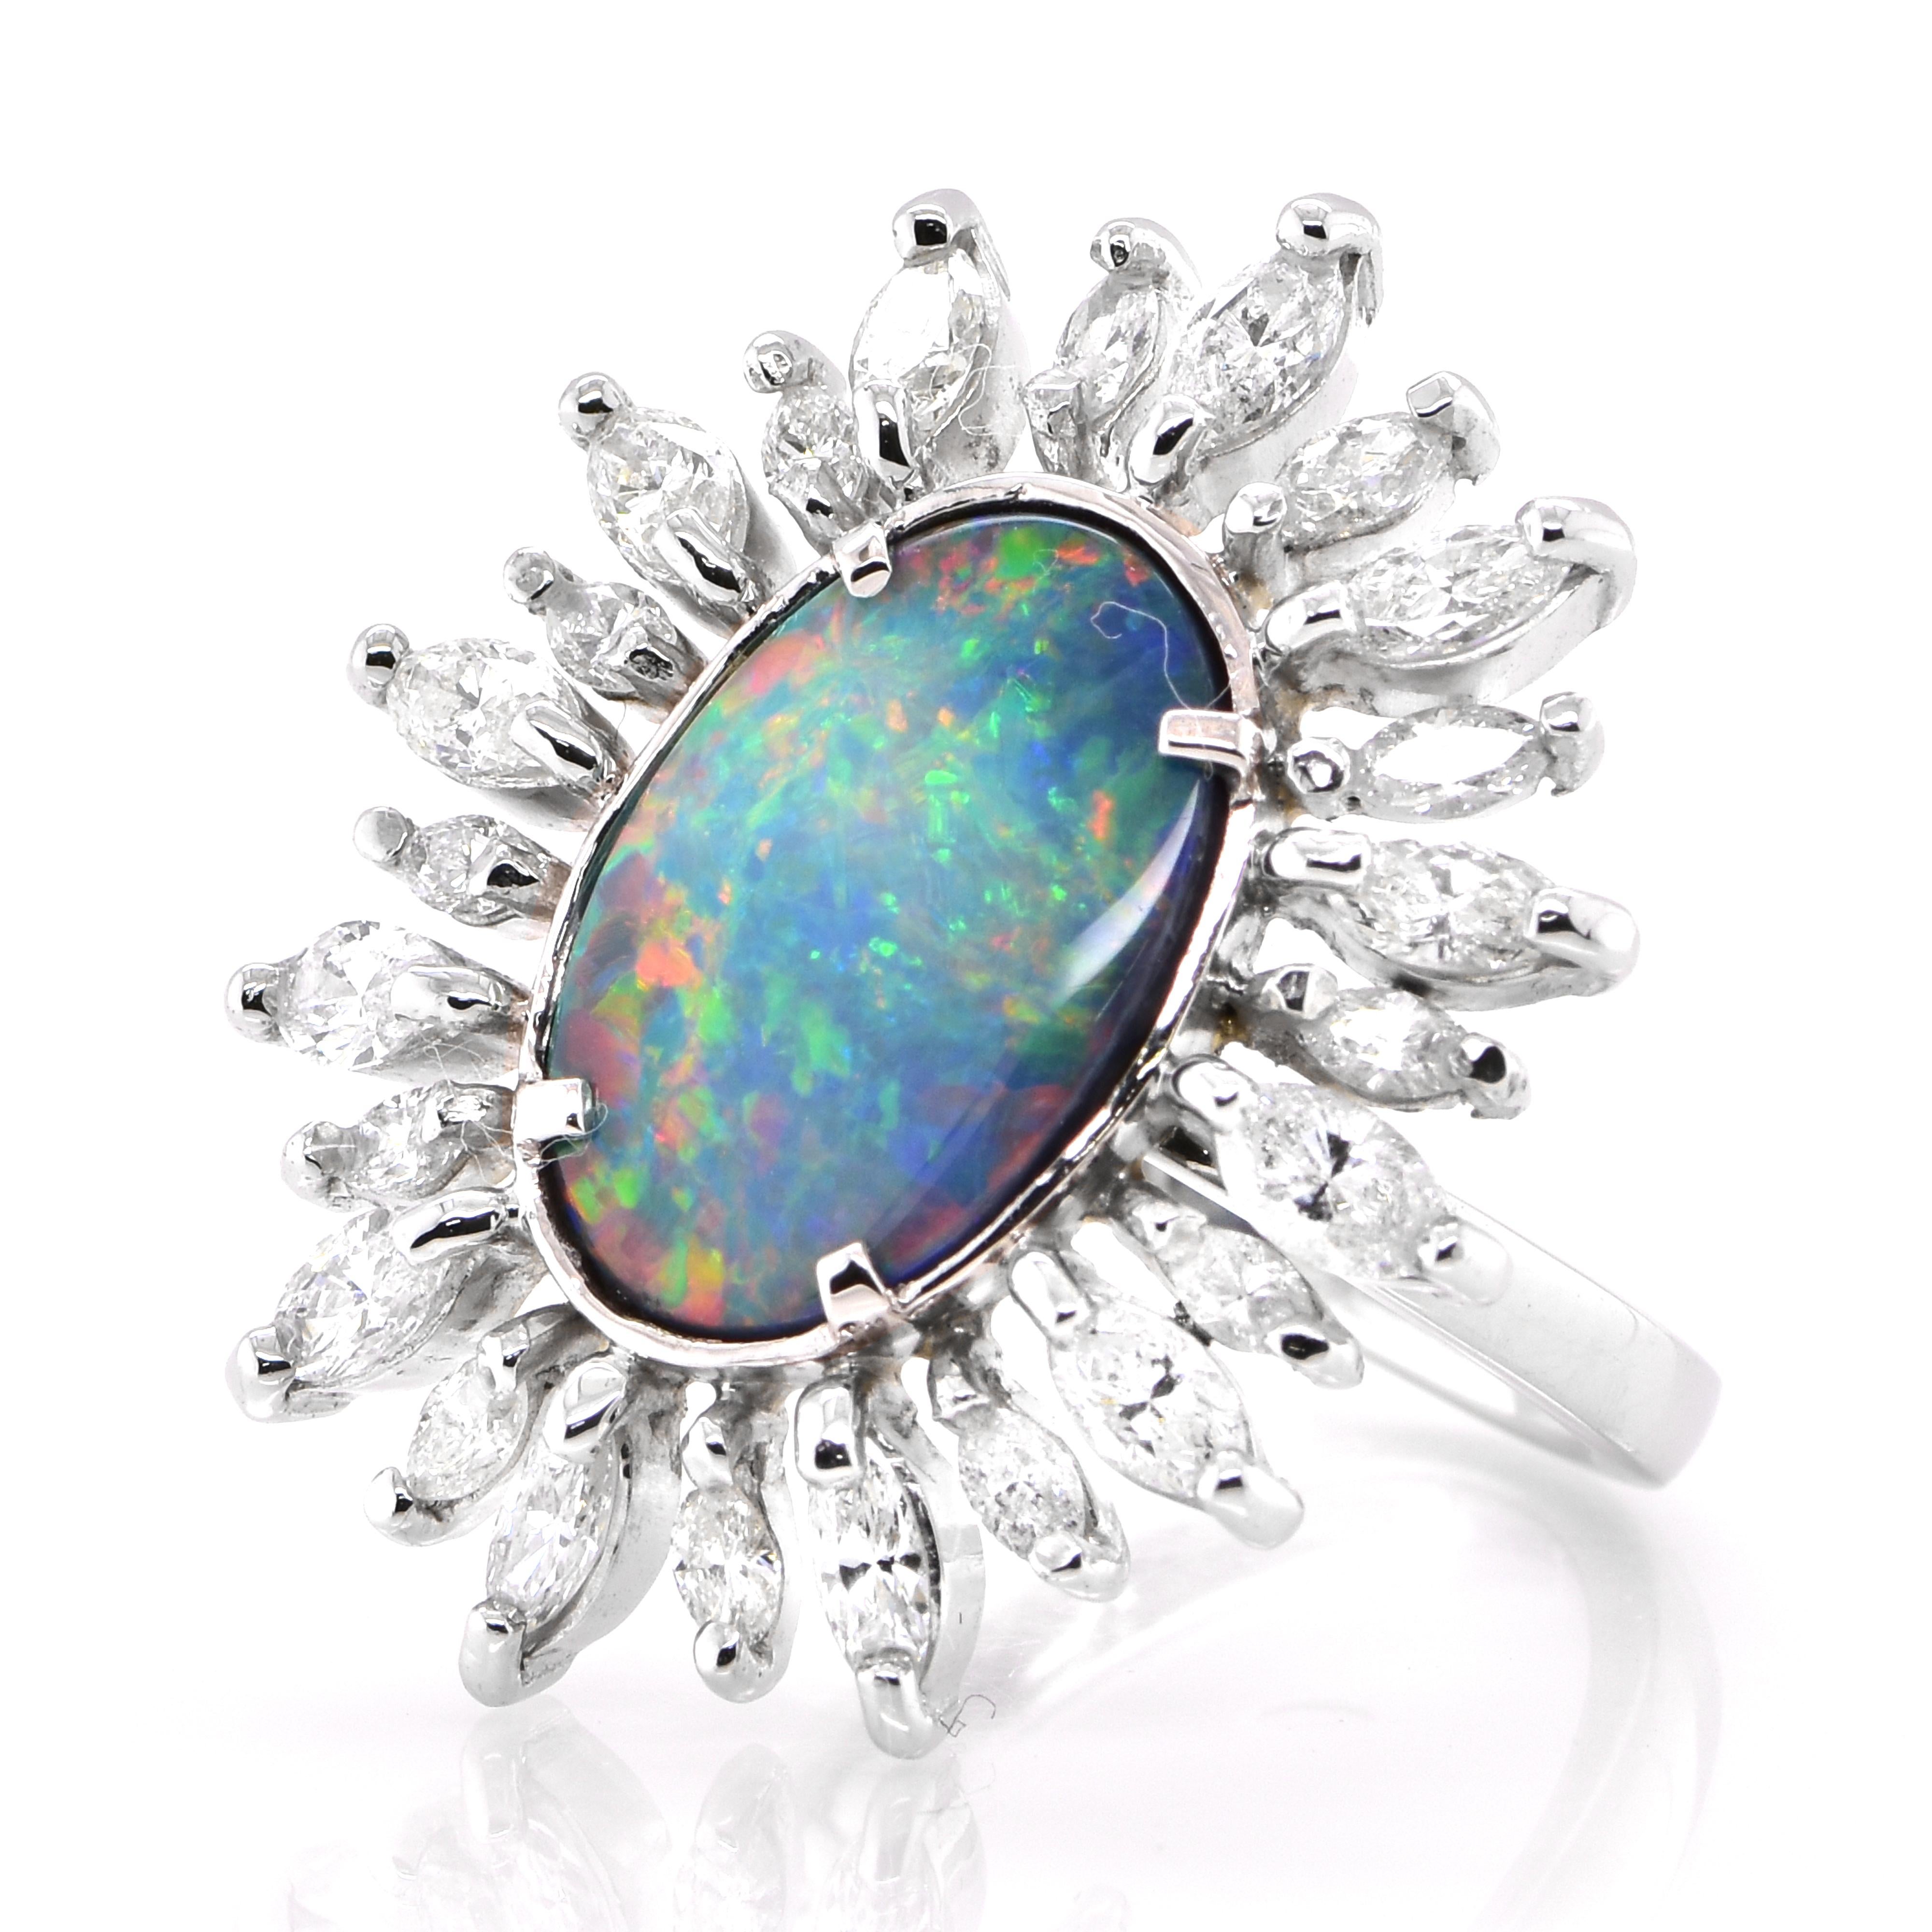 A beautiful ring featuring a 2.537 Carat, Natural, Australian (Lighting Ridge) Black Opal and 1.63 Carats of Diamond Accents set in Platinum. The Opal displays very good play of color! Opals are known for exhibiting flashes of rainbow colors known